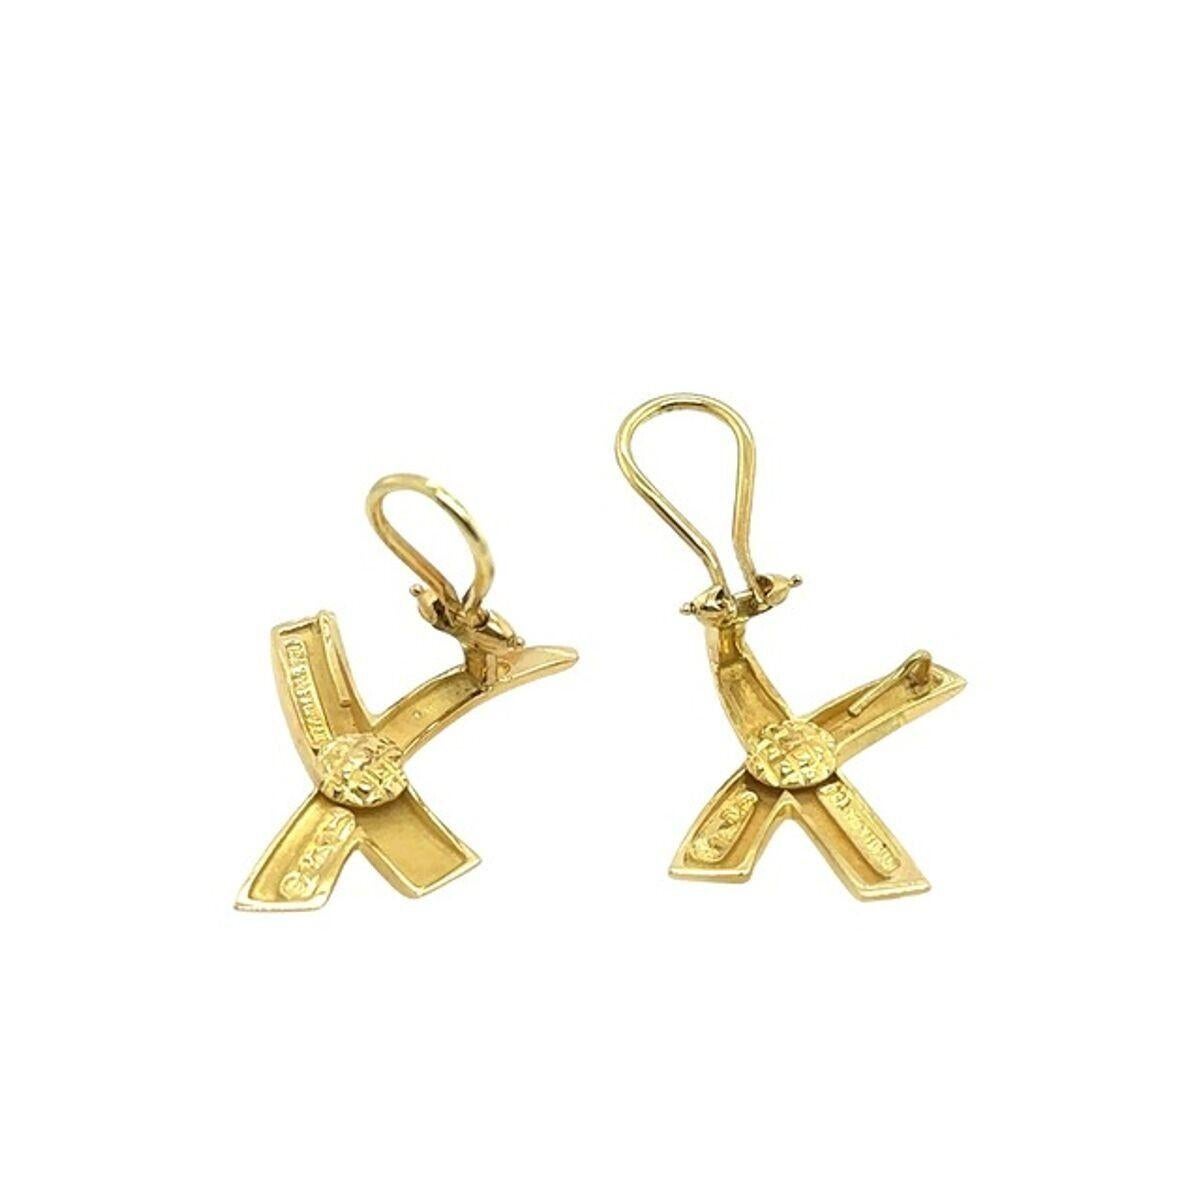 Tiffany & Co. Paloma's Graffiti X Earrings are a perfect pair of earrings for the modern woman. The earrings are crafted with 18ct Yellow Gold and have a total weight of 10.2 grams.

Additional Information:
Total Gold Weight: 10.2g 
Earring Size: